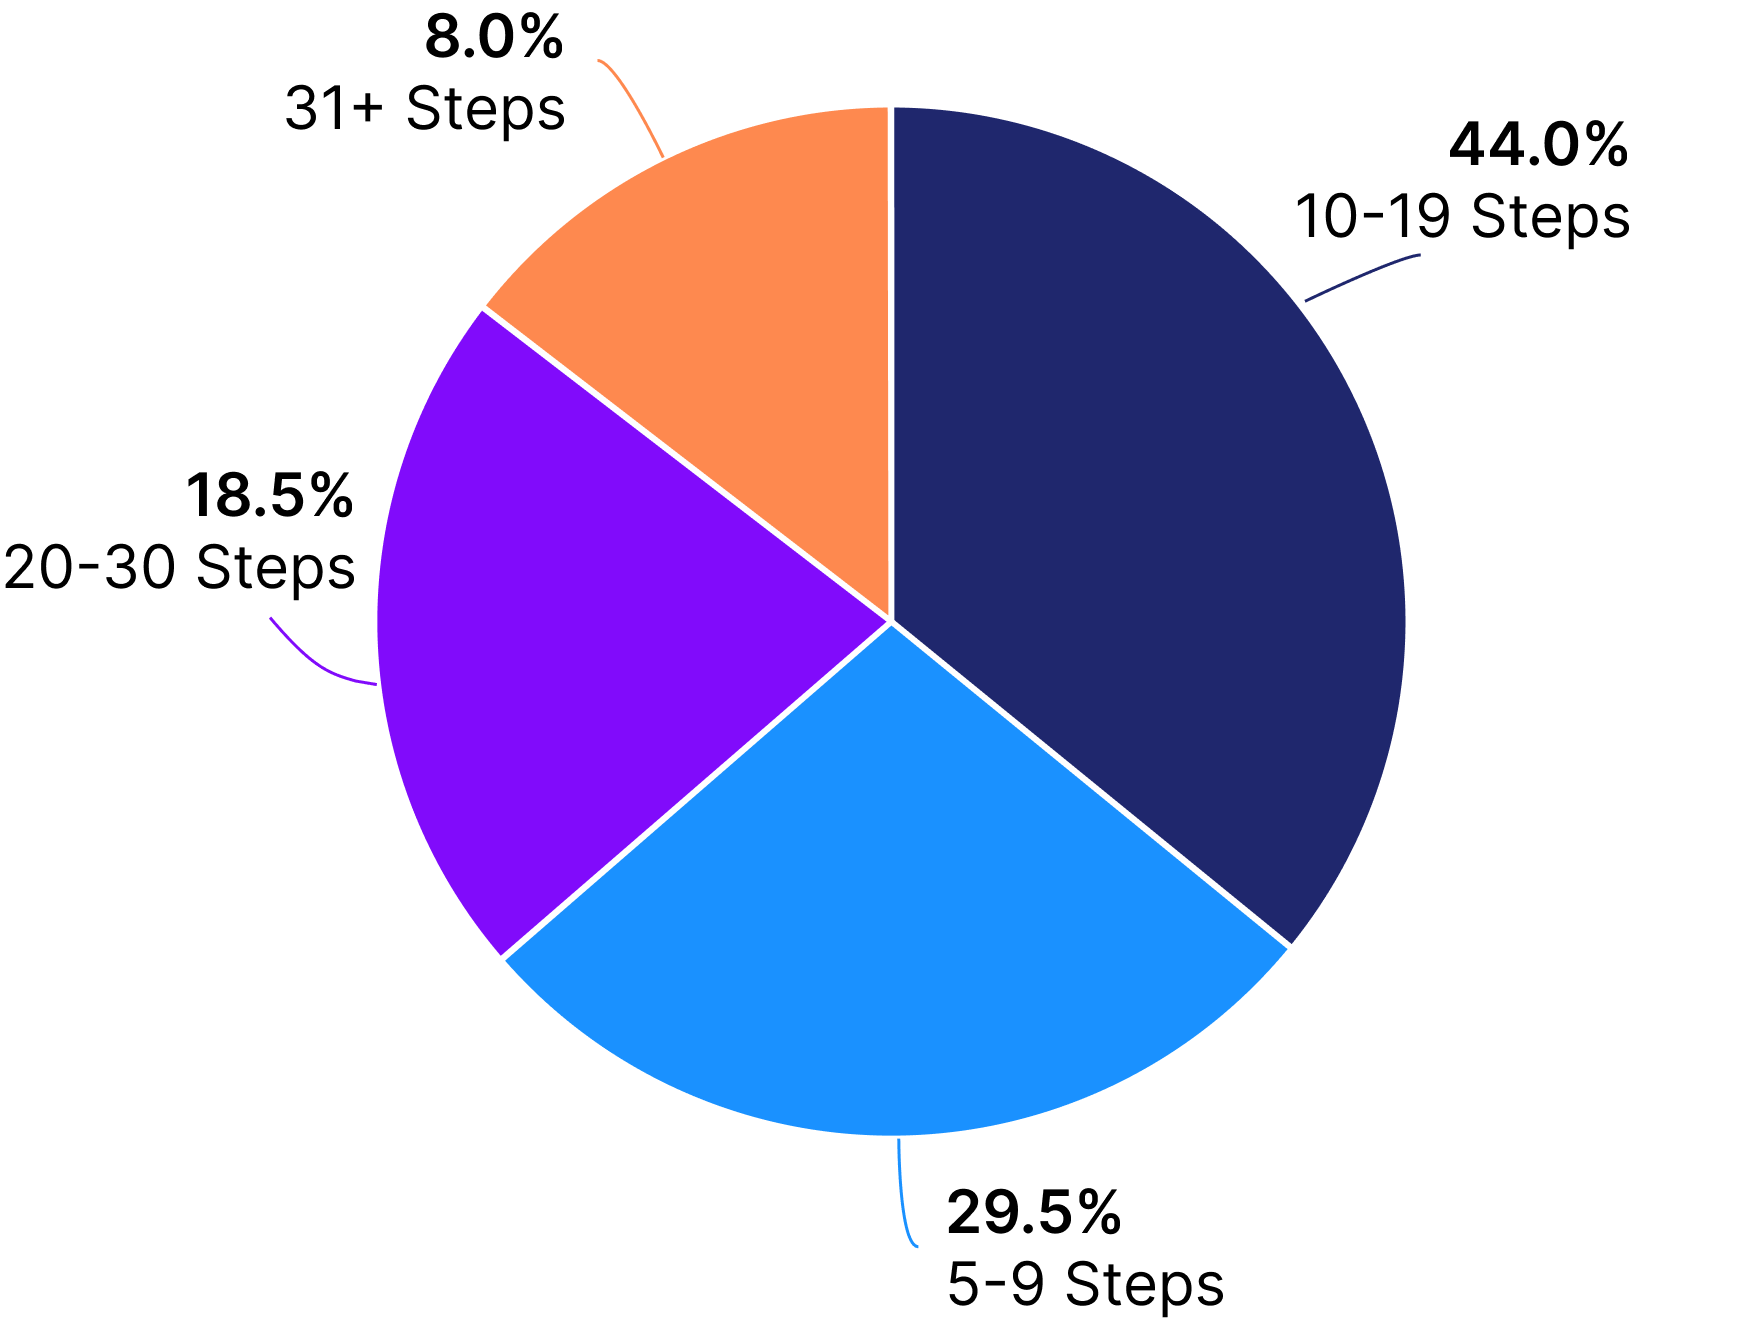 Top performing demos by step count of demo pie chart